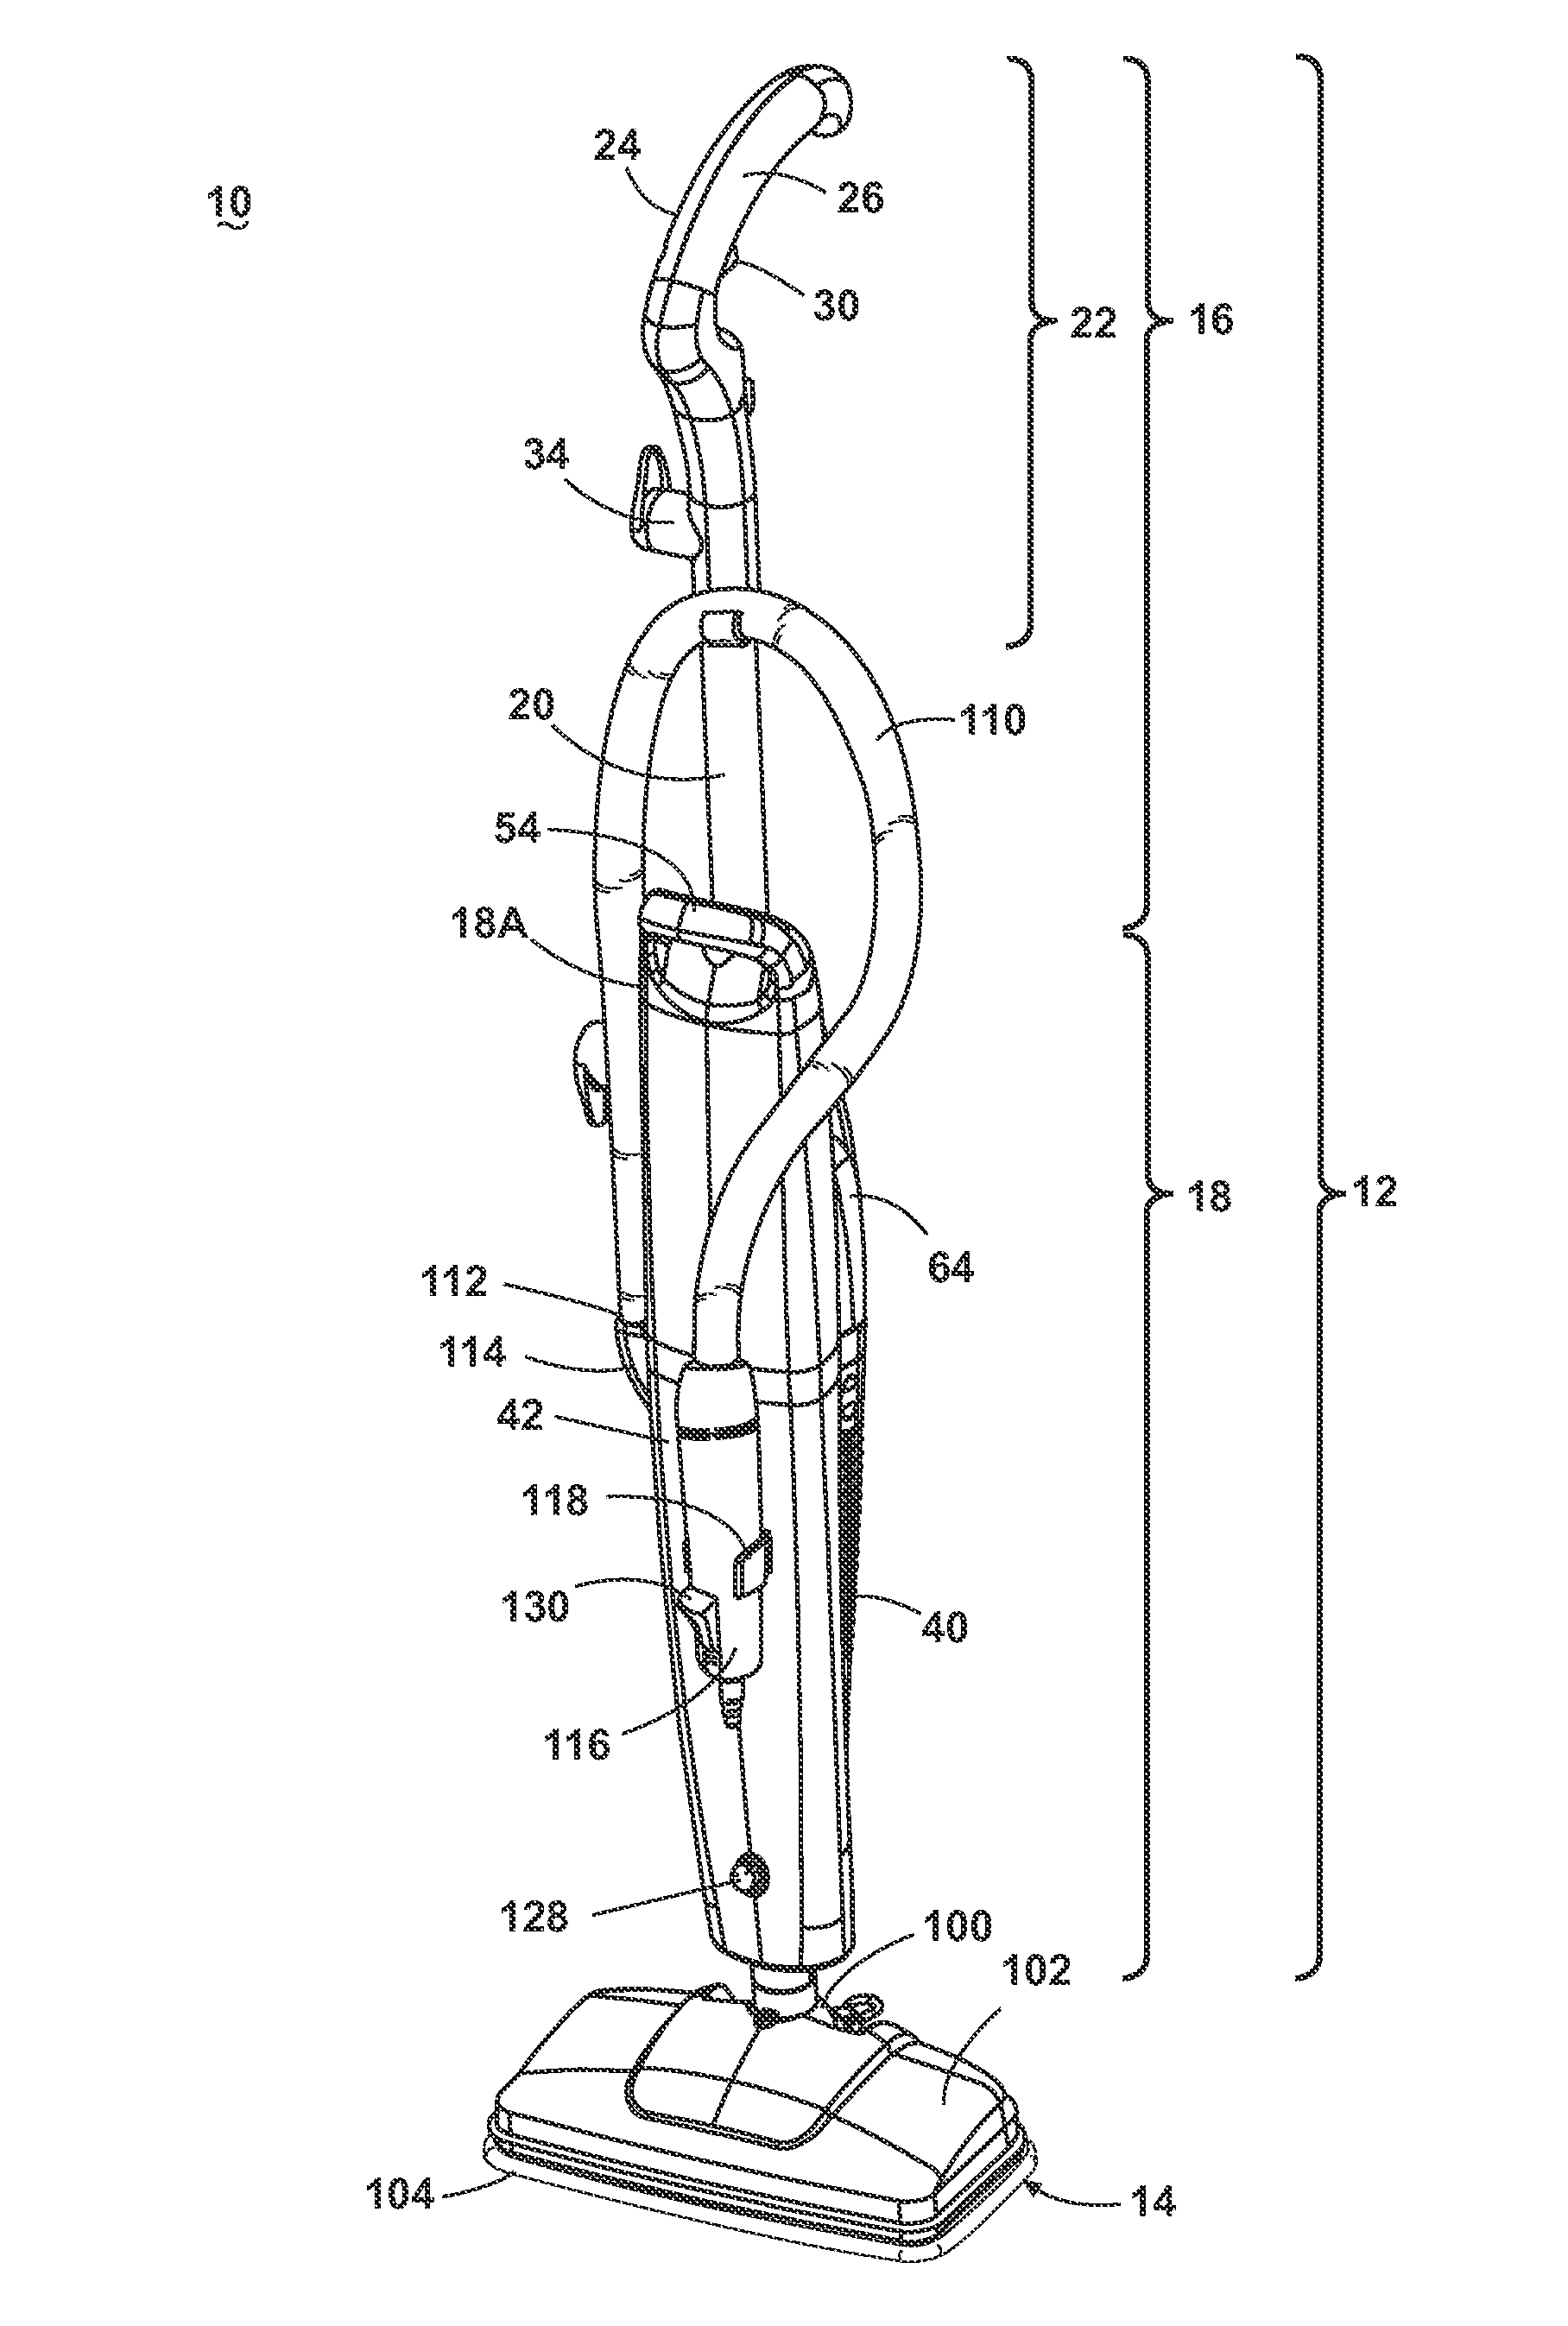 Upright steam mop with auxiliary hand tool